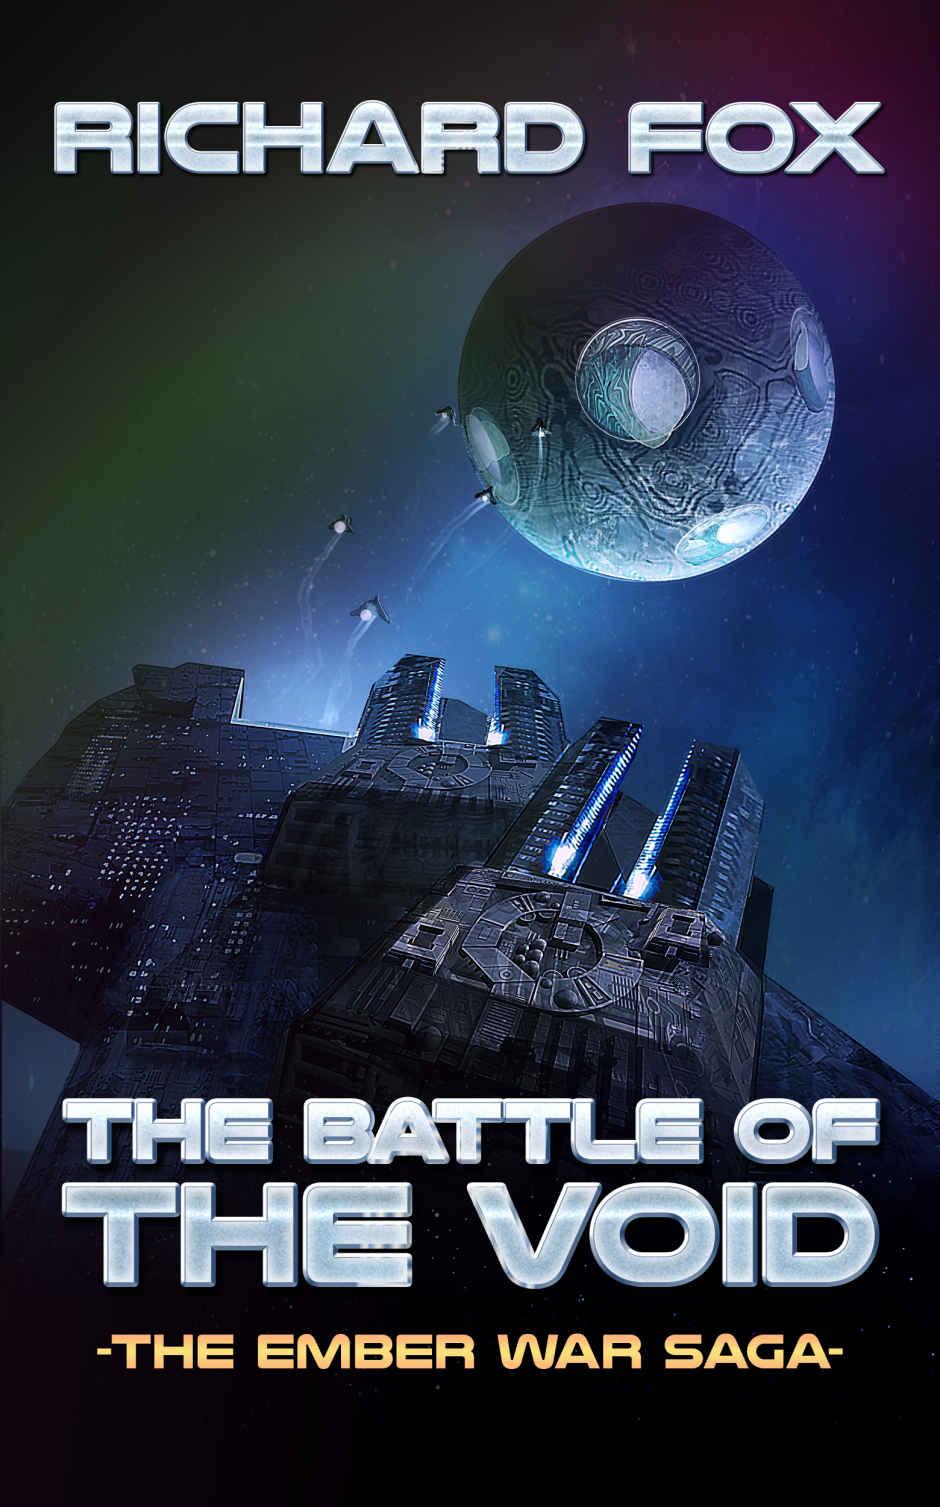 The Battle of the Void (The Ember War Saga Book 6) by Richard Fox